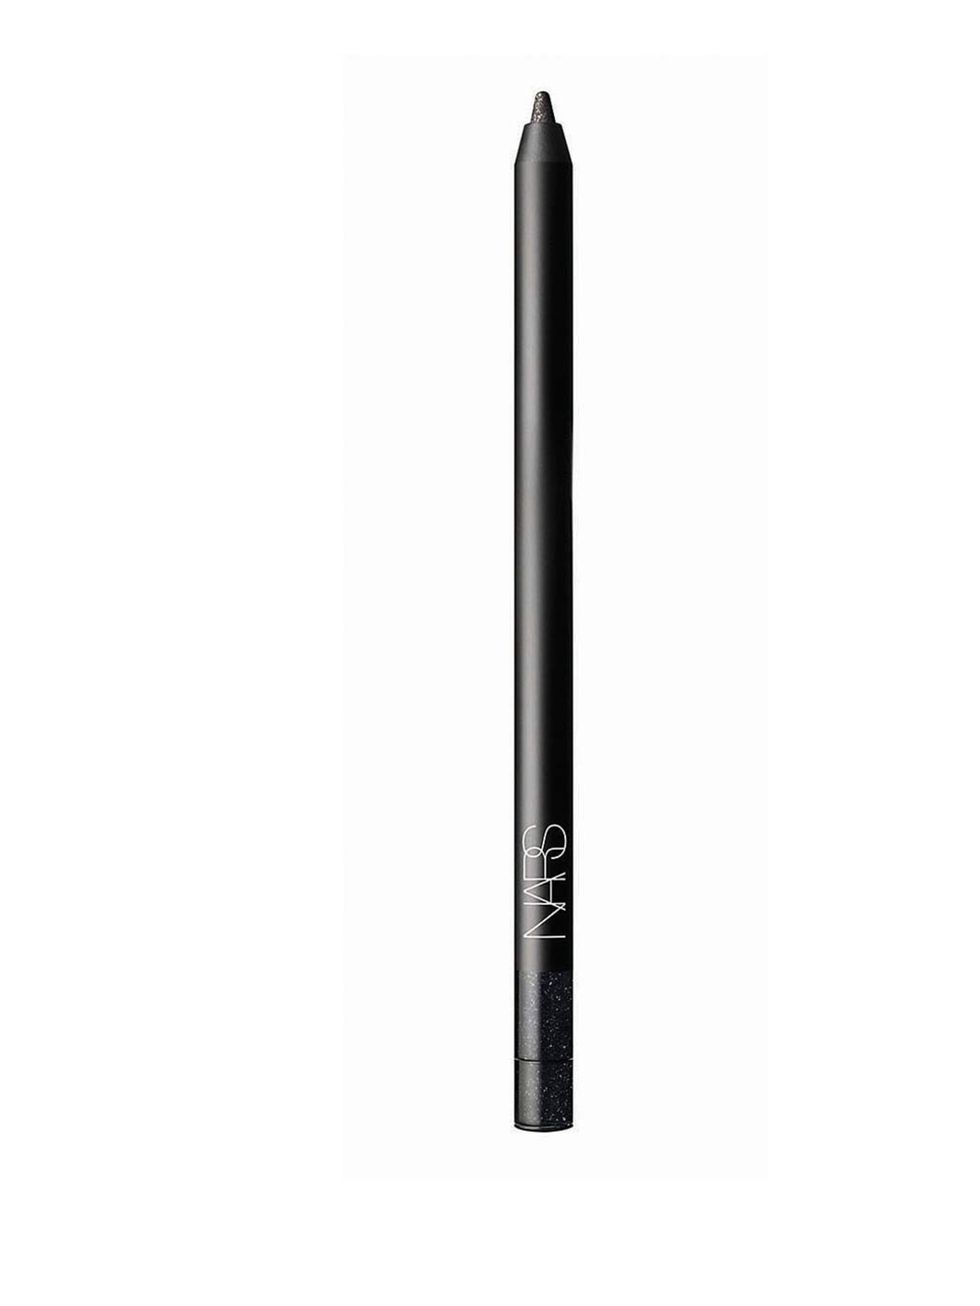 <p><strong>Gillian Brett</strong></p><p><strong> </strong><a href="http://www.narscosmetics.co.uk/color/eyes/larger-than-life-long-wear-eyeliner">NARS Larger than Life Long-Wear Eyeliner, £19</a></p><p>I like looking a little glam when I pound the paveme